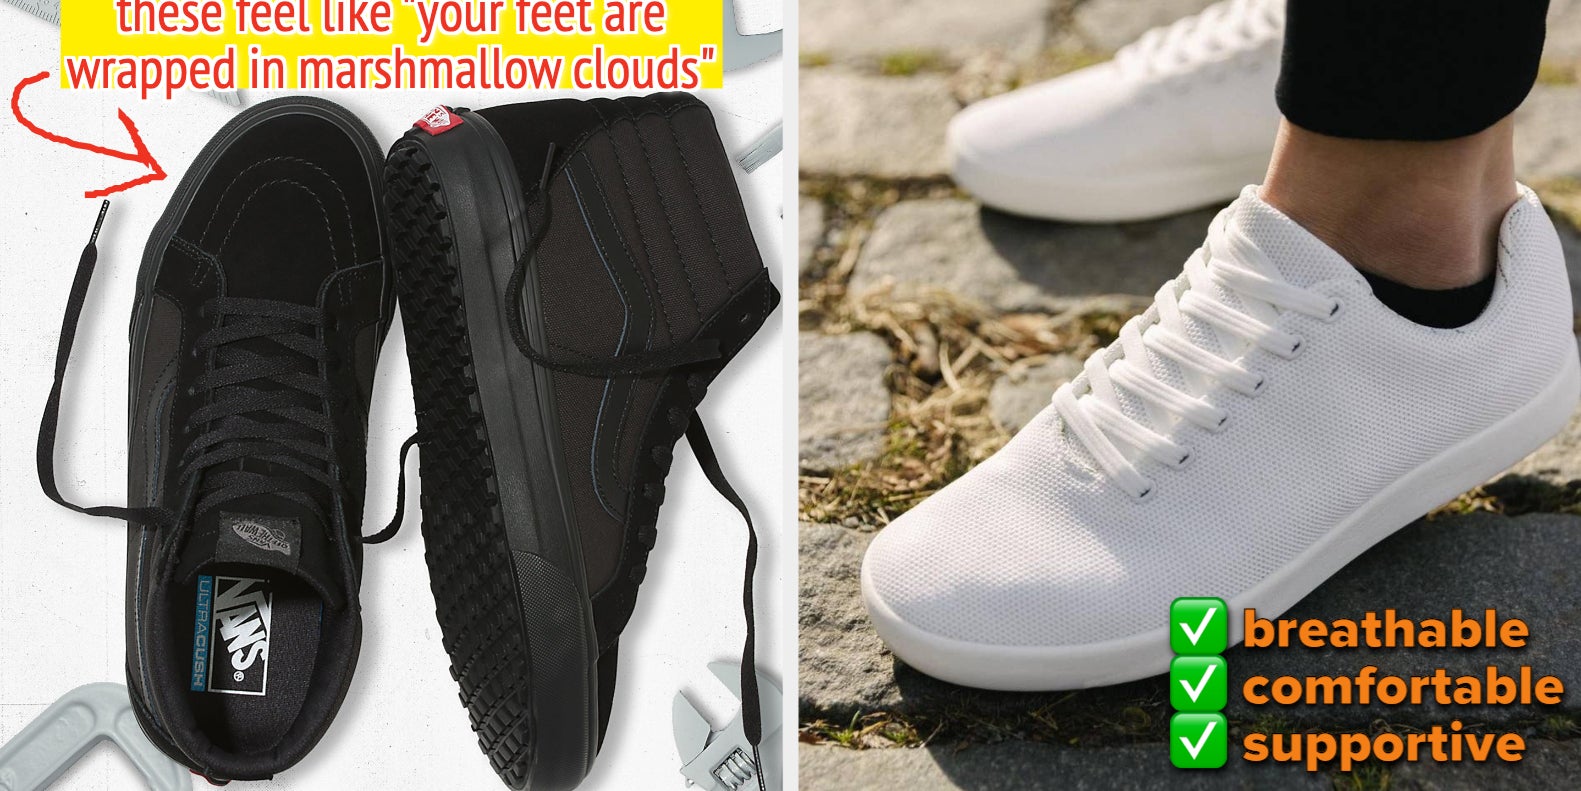 21 Best Non-Slip Shoes That Are Actually Cute